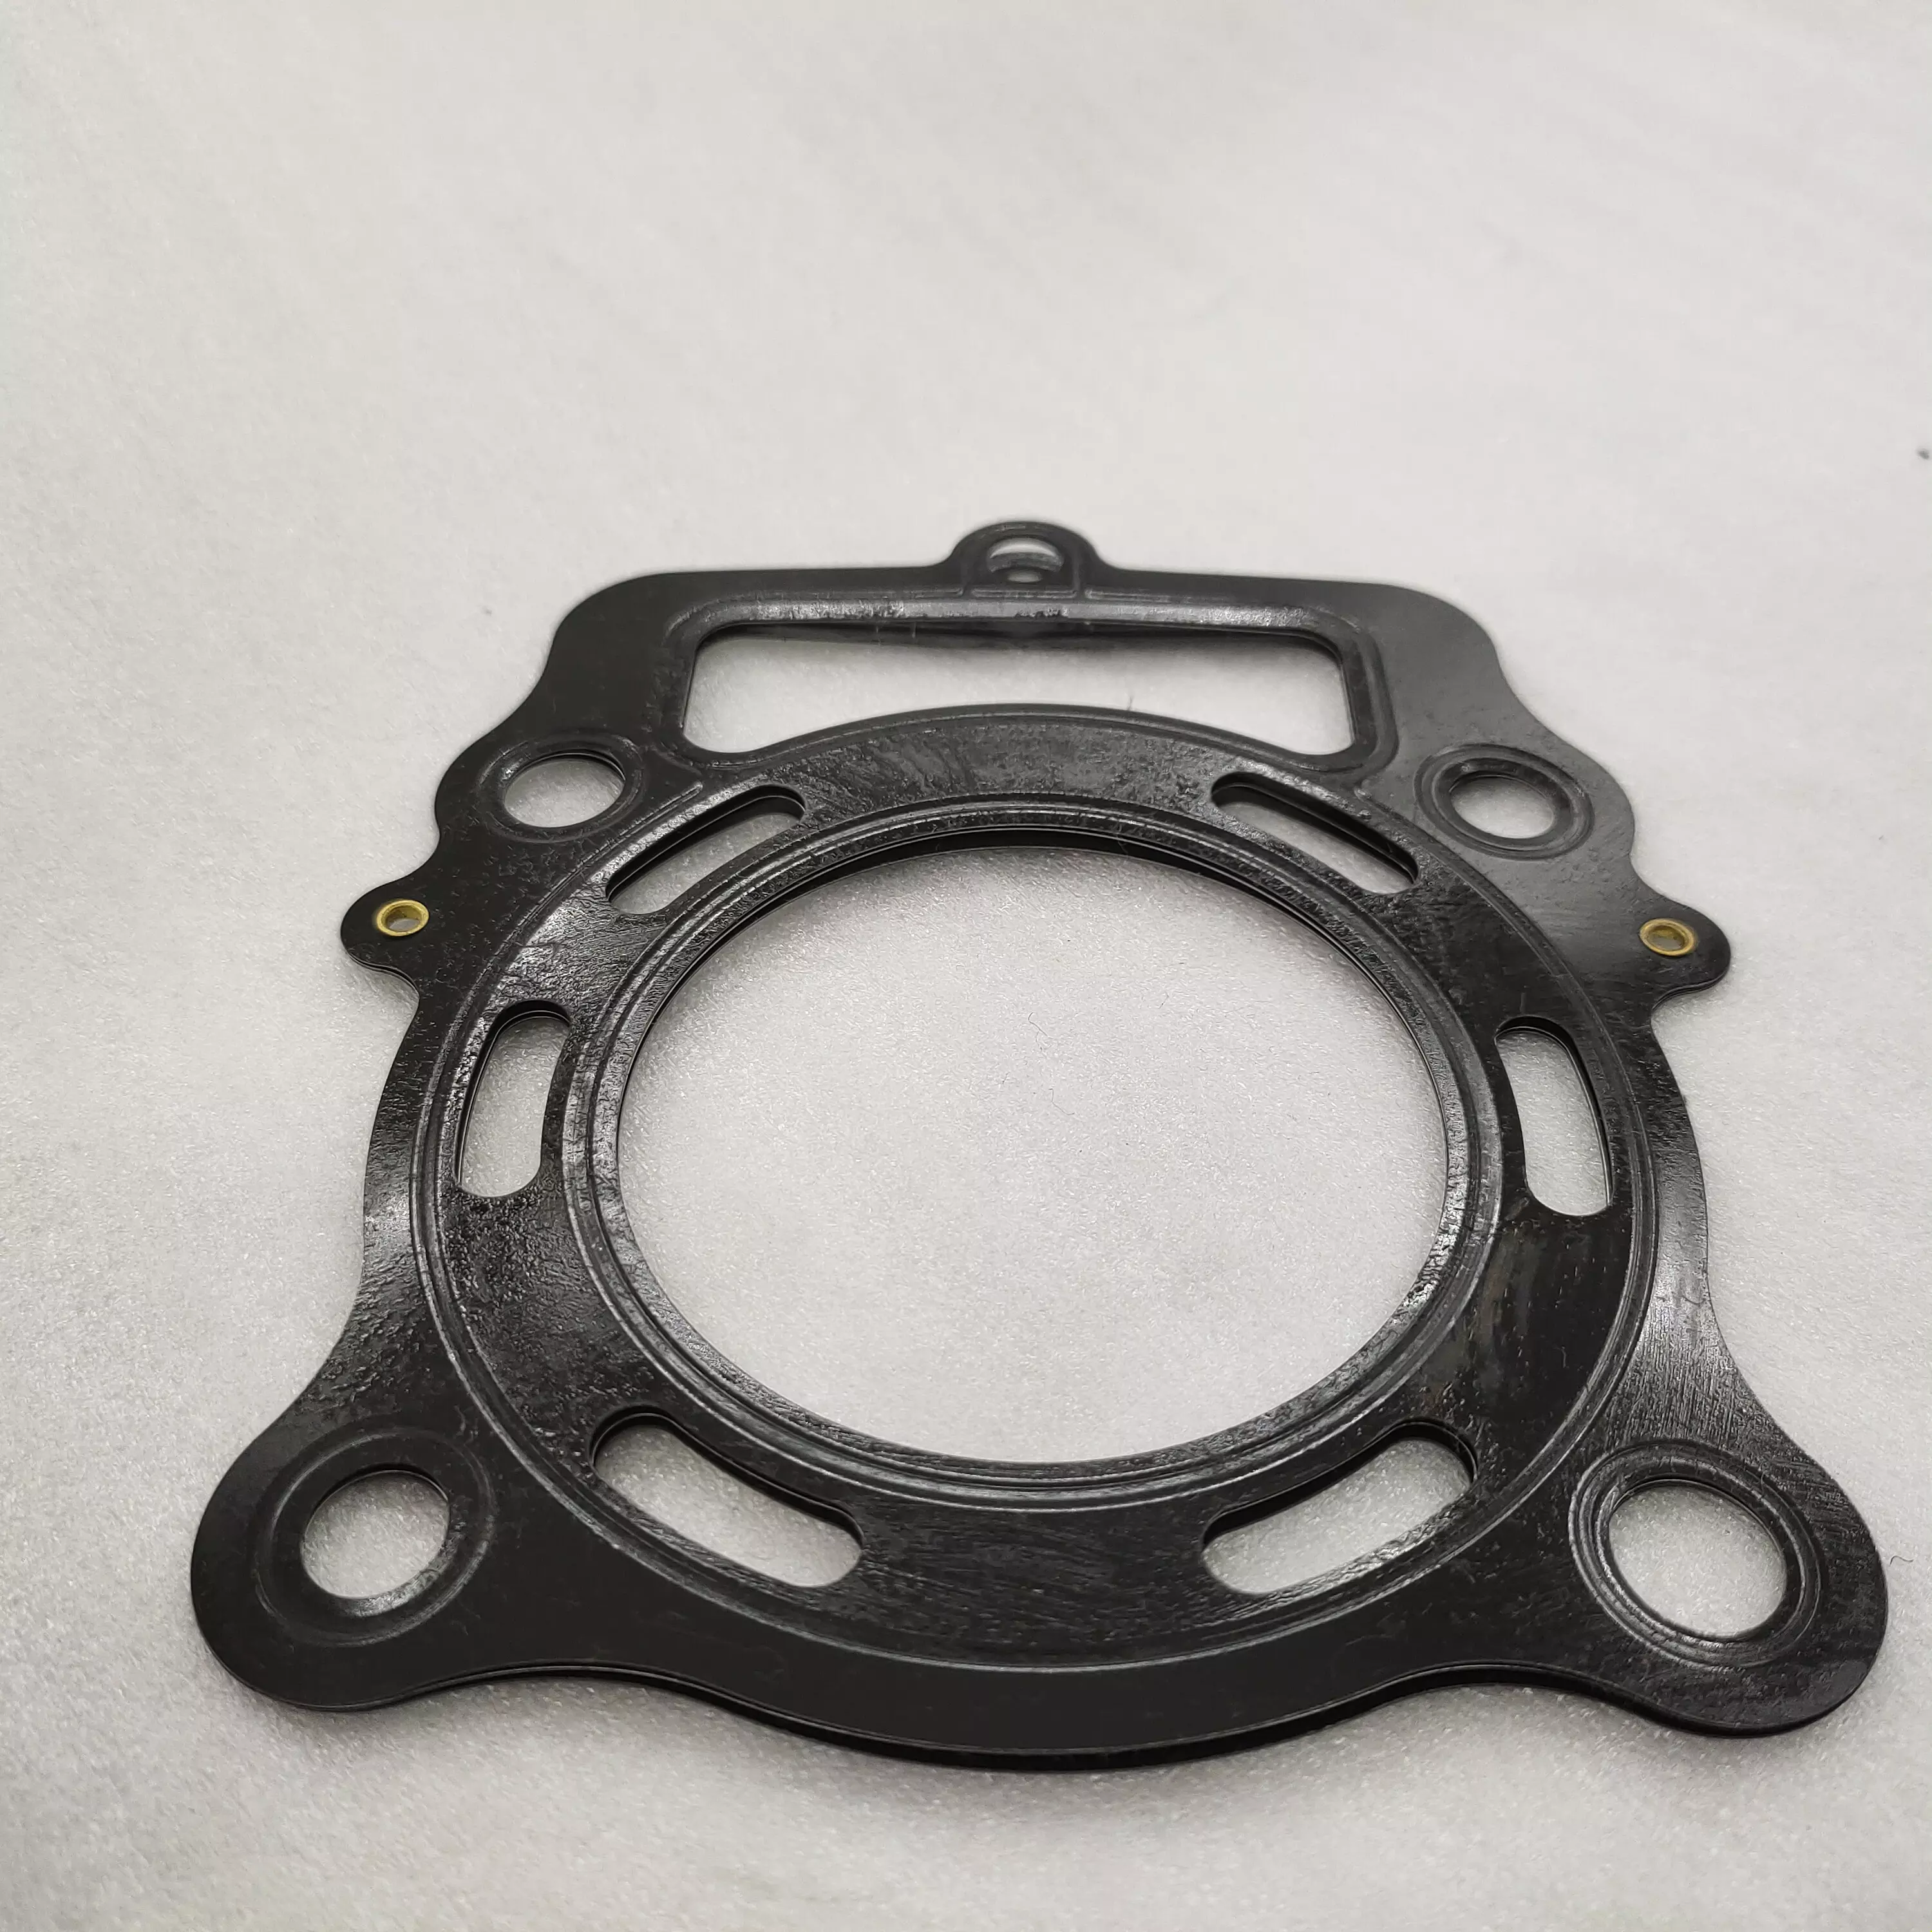 China top quality motorcycle spare parts tricycle LIFAN 250cc water-cooled engine cylinder assembly gasket for global market